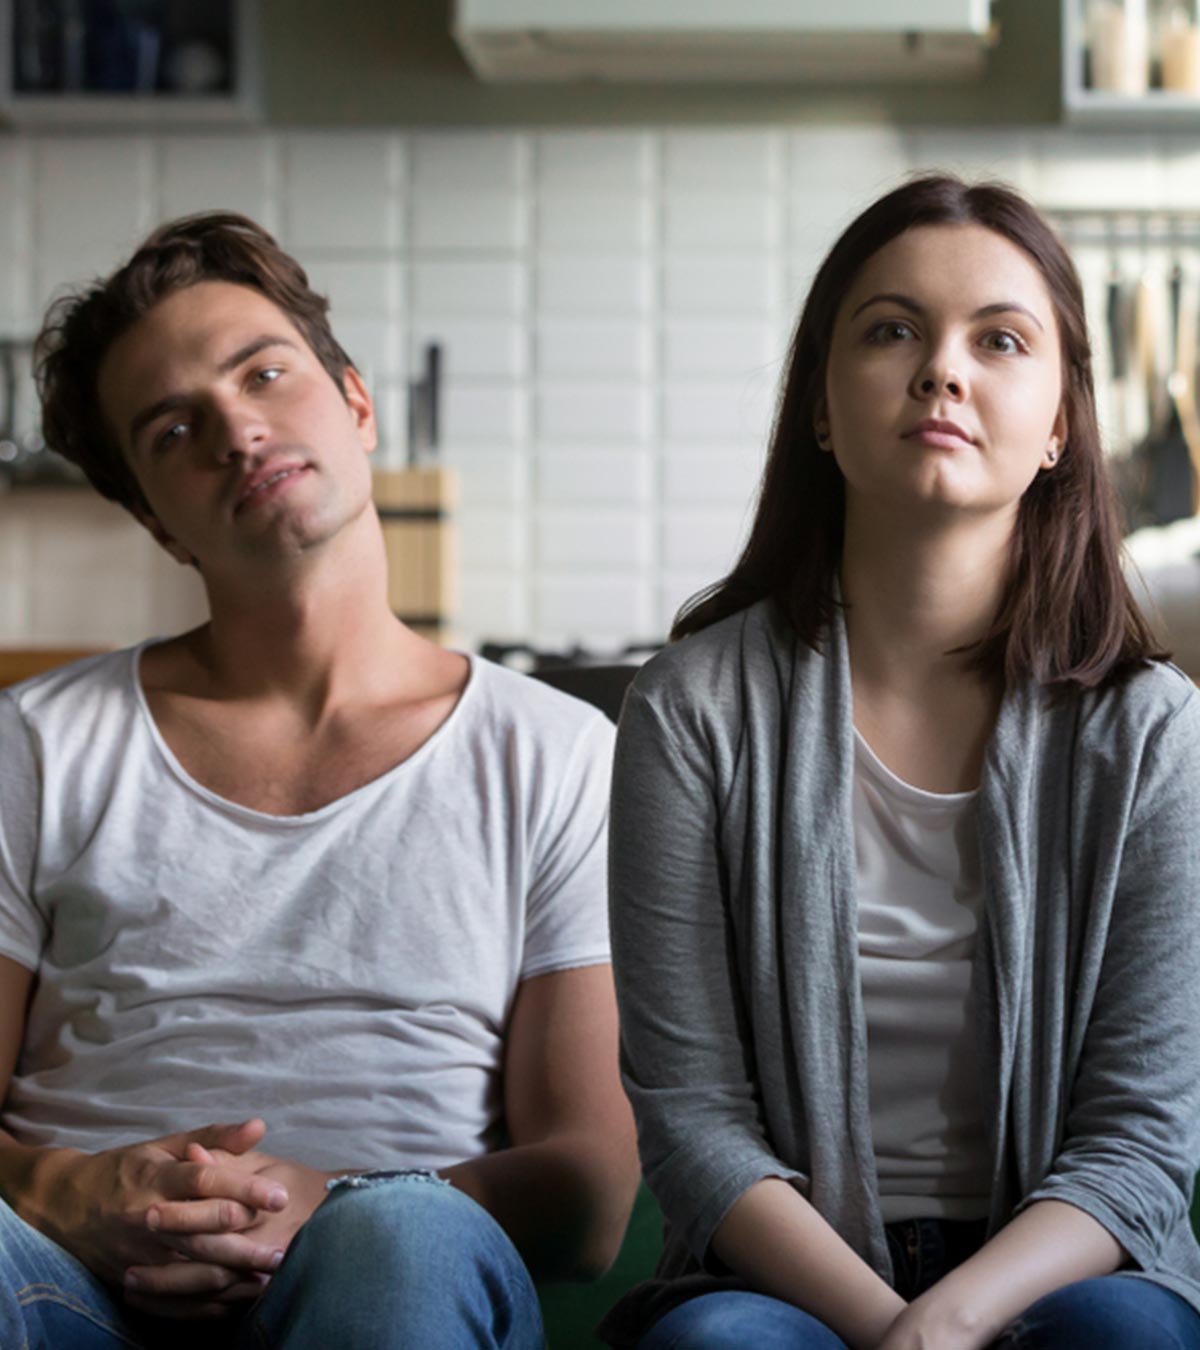 11 Reasons Why Guys Act Distant When They Like You